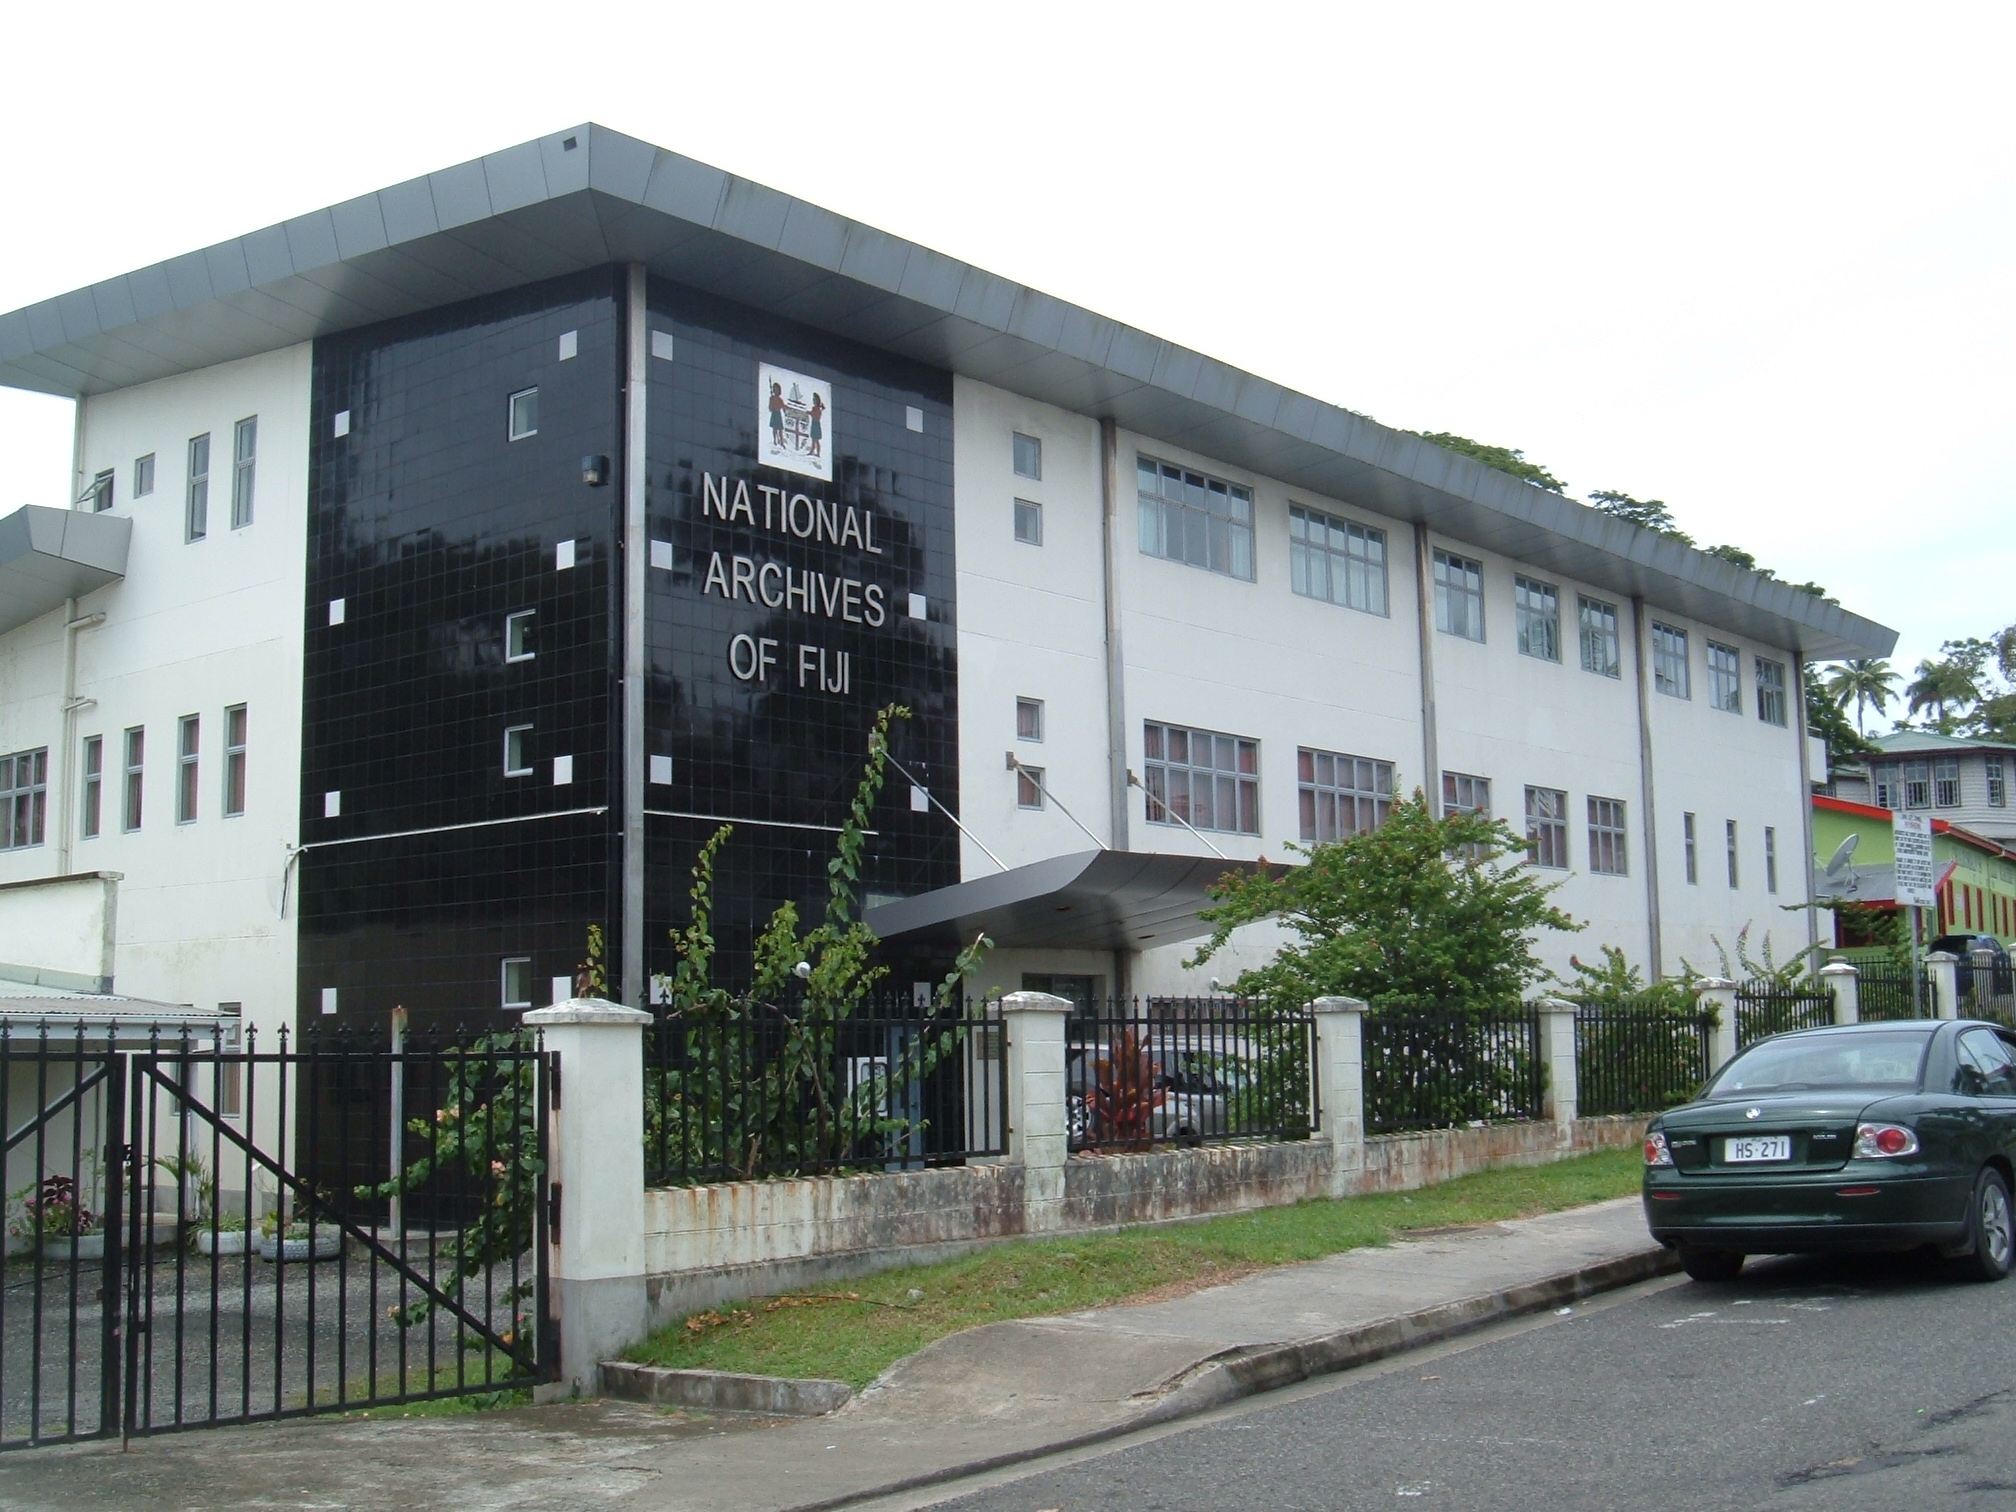 National archives of Fiji